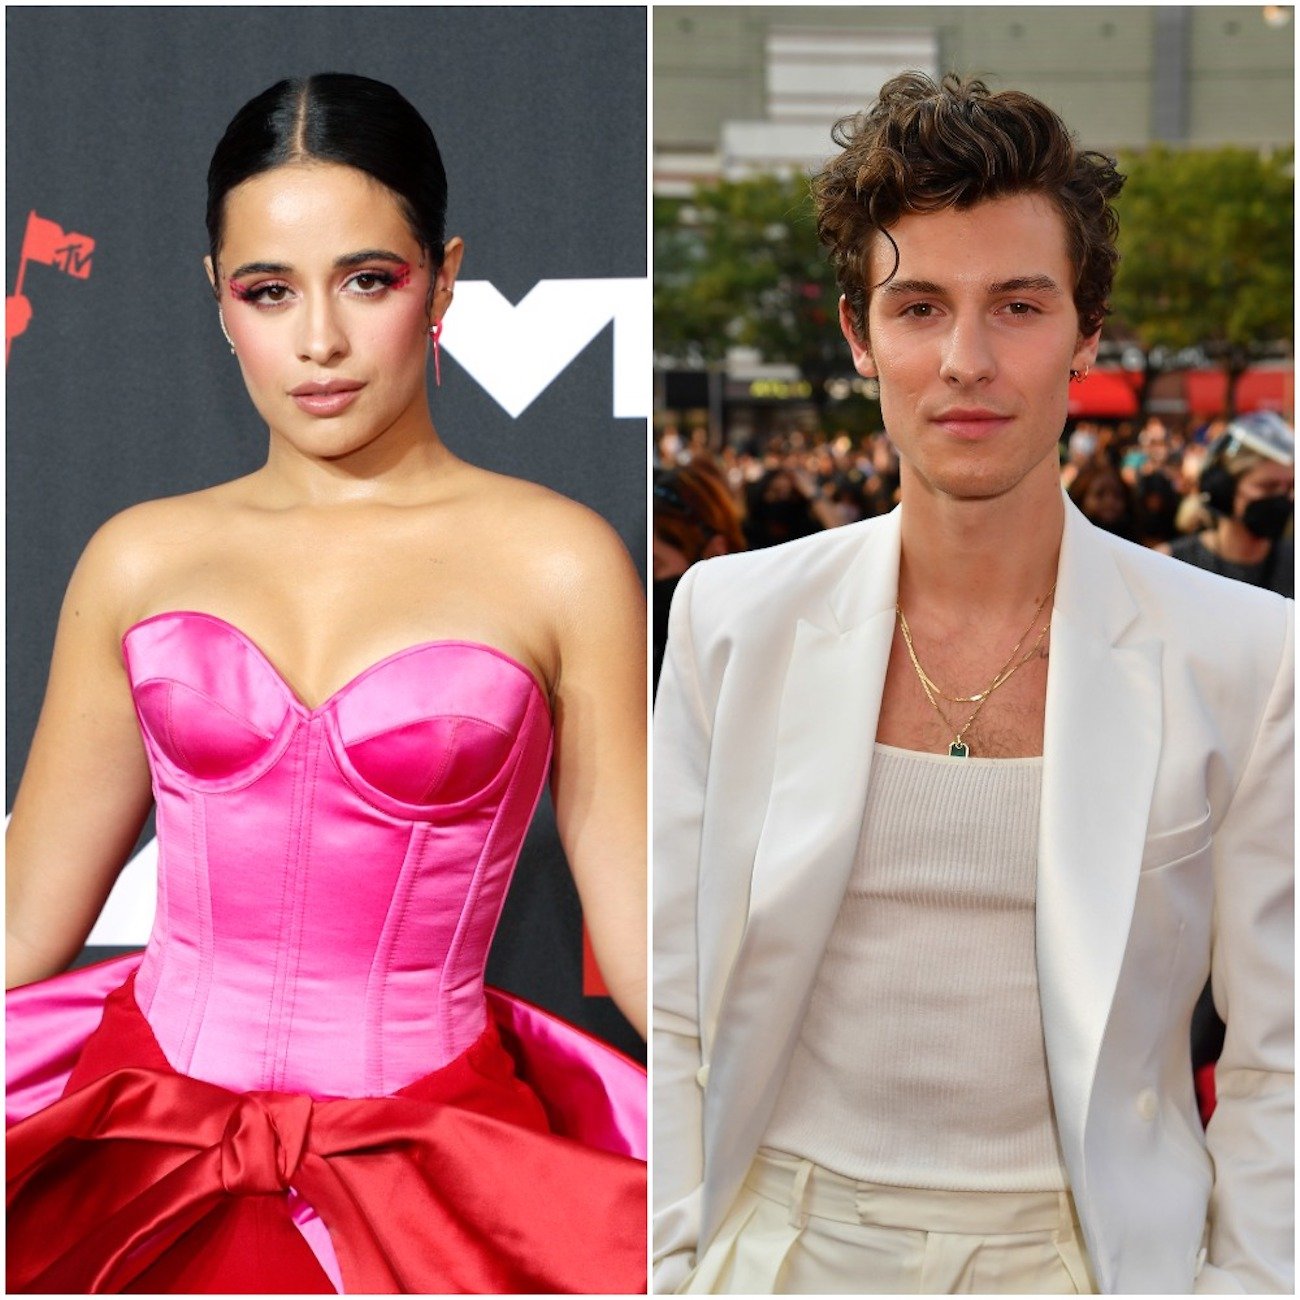 Camila Cabello wears a pink gown at the 2021 VMAs; Shawn Mendes wears a white outfit at the 2021 VMAs